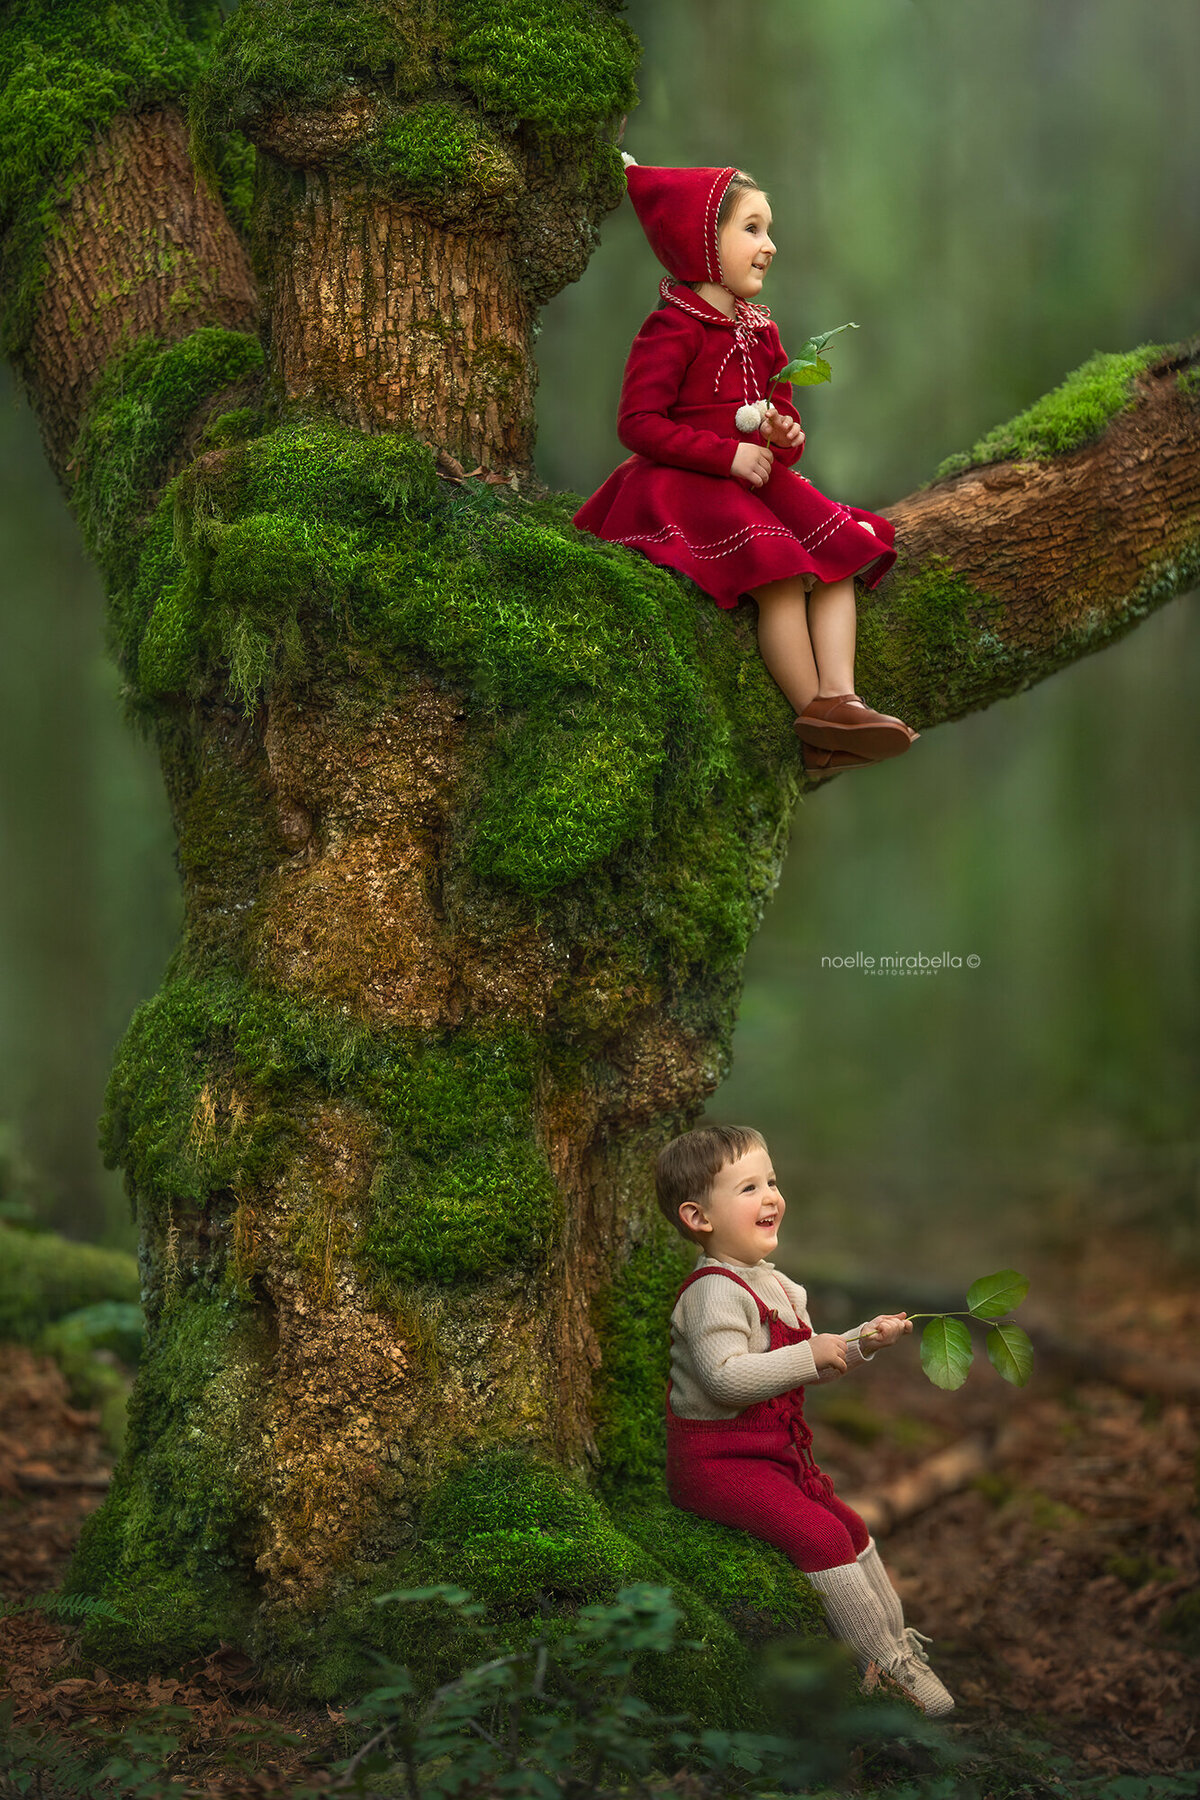 Two children dressed as pixies in large mossy tree in the forest.